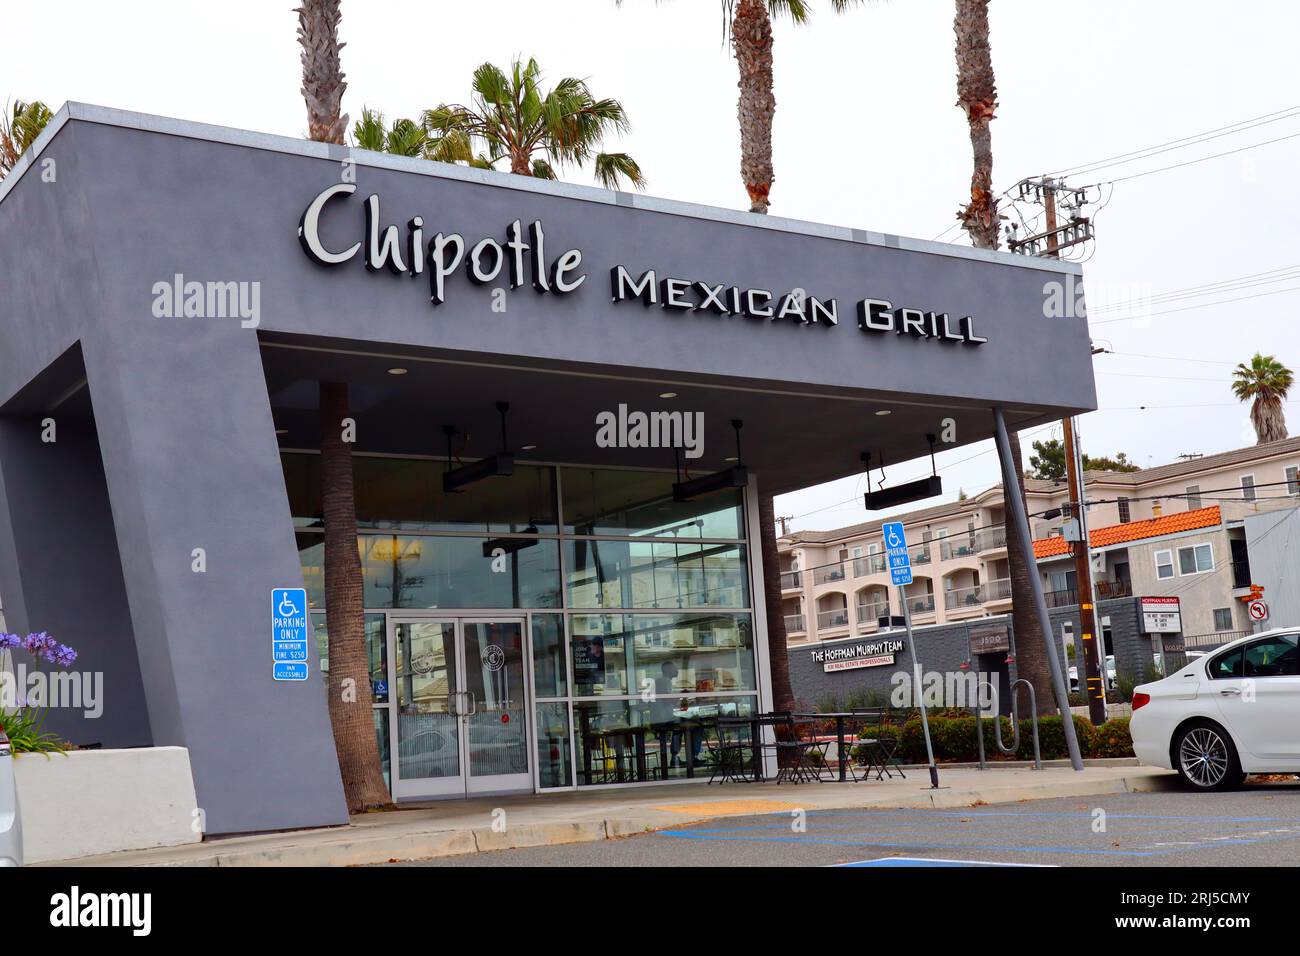 Chiptole Mexican Grill Restaurant Stock Photo